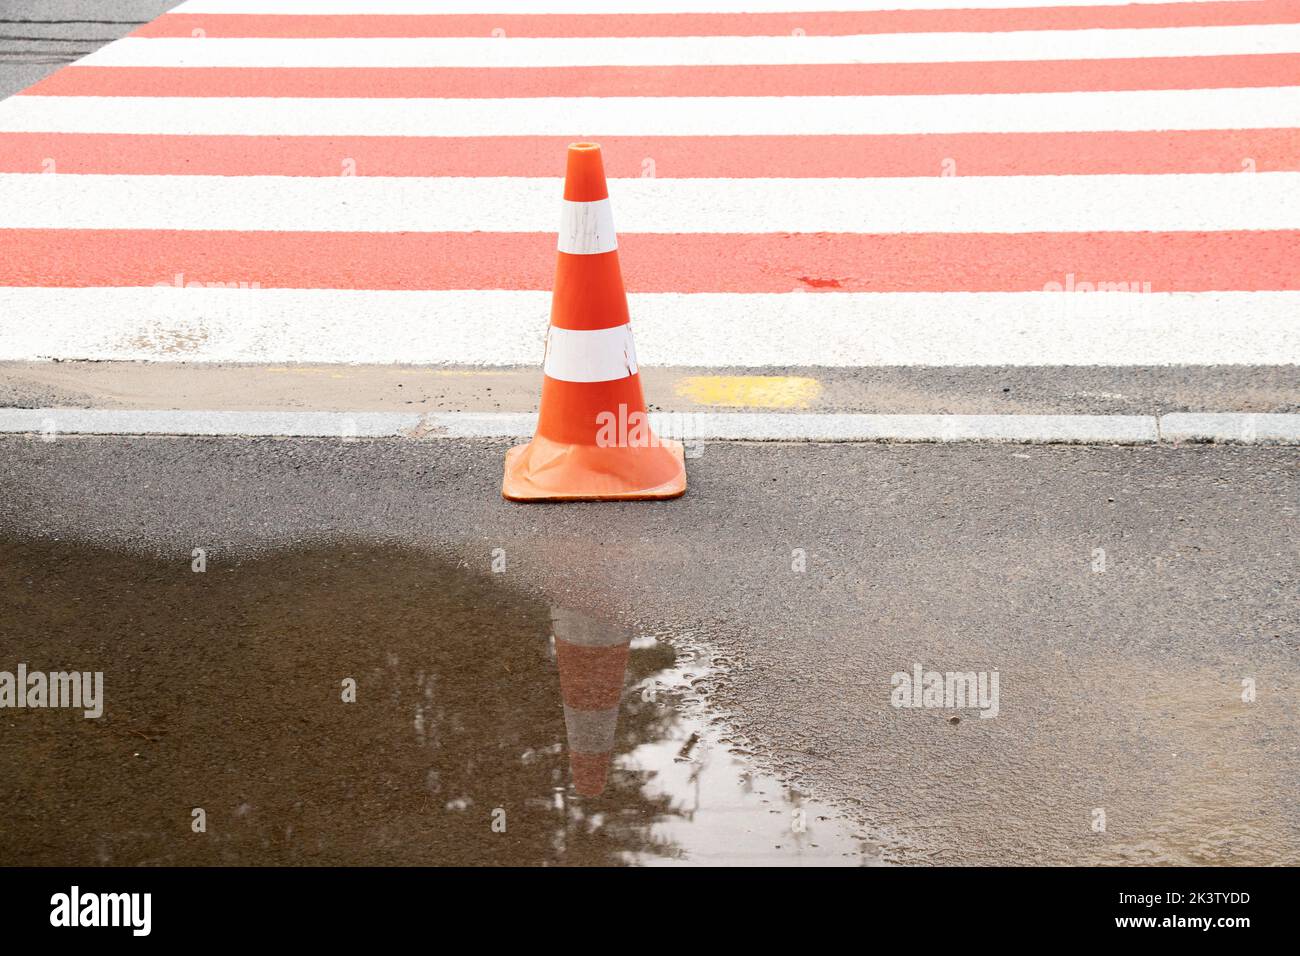 A striped road cone stands on a zebra crossing near a puddle in autumn in Ukraine Stock Photo